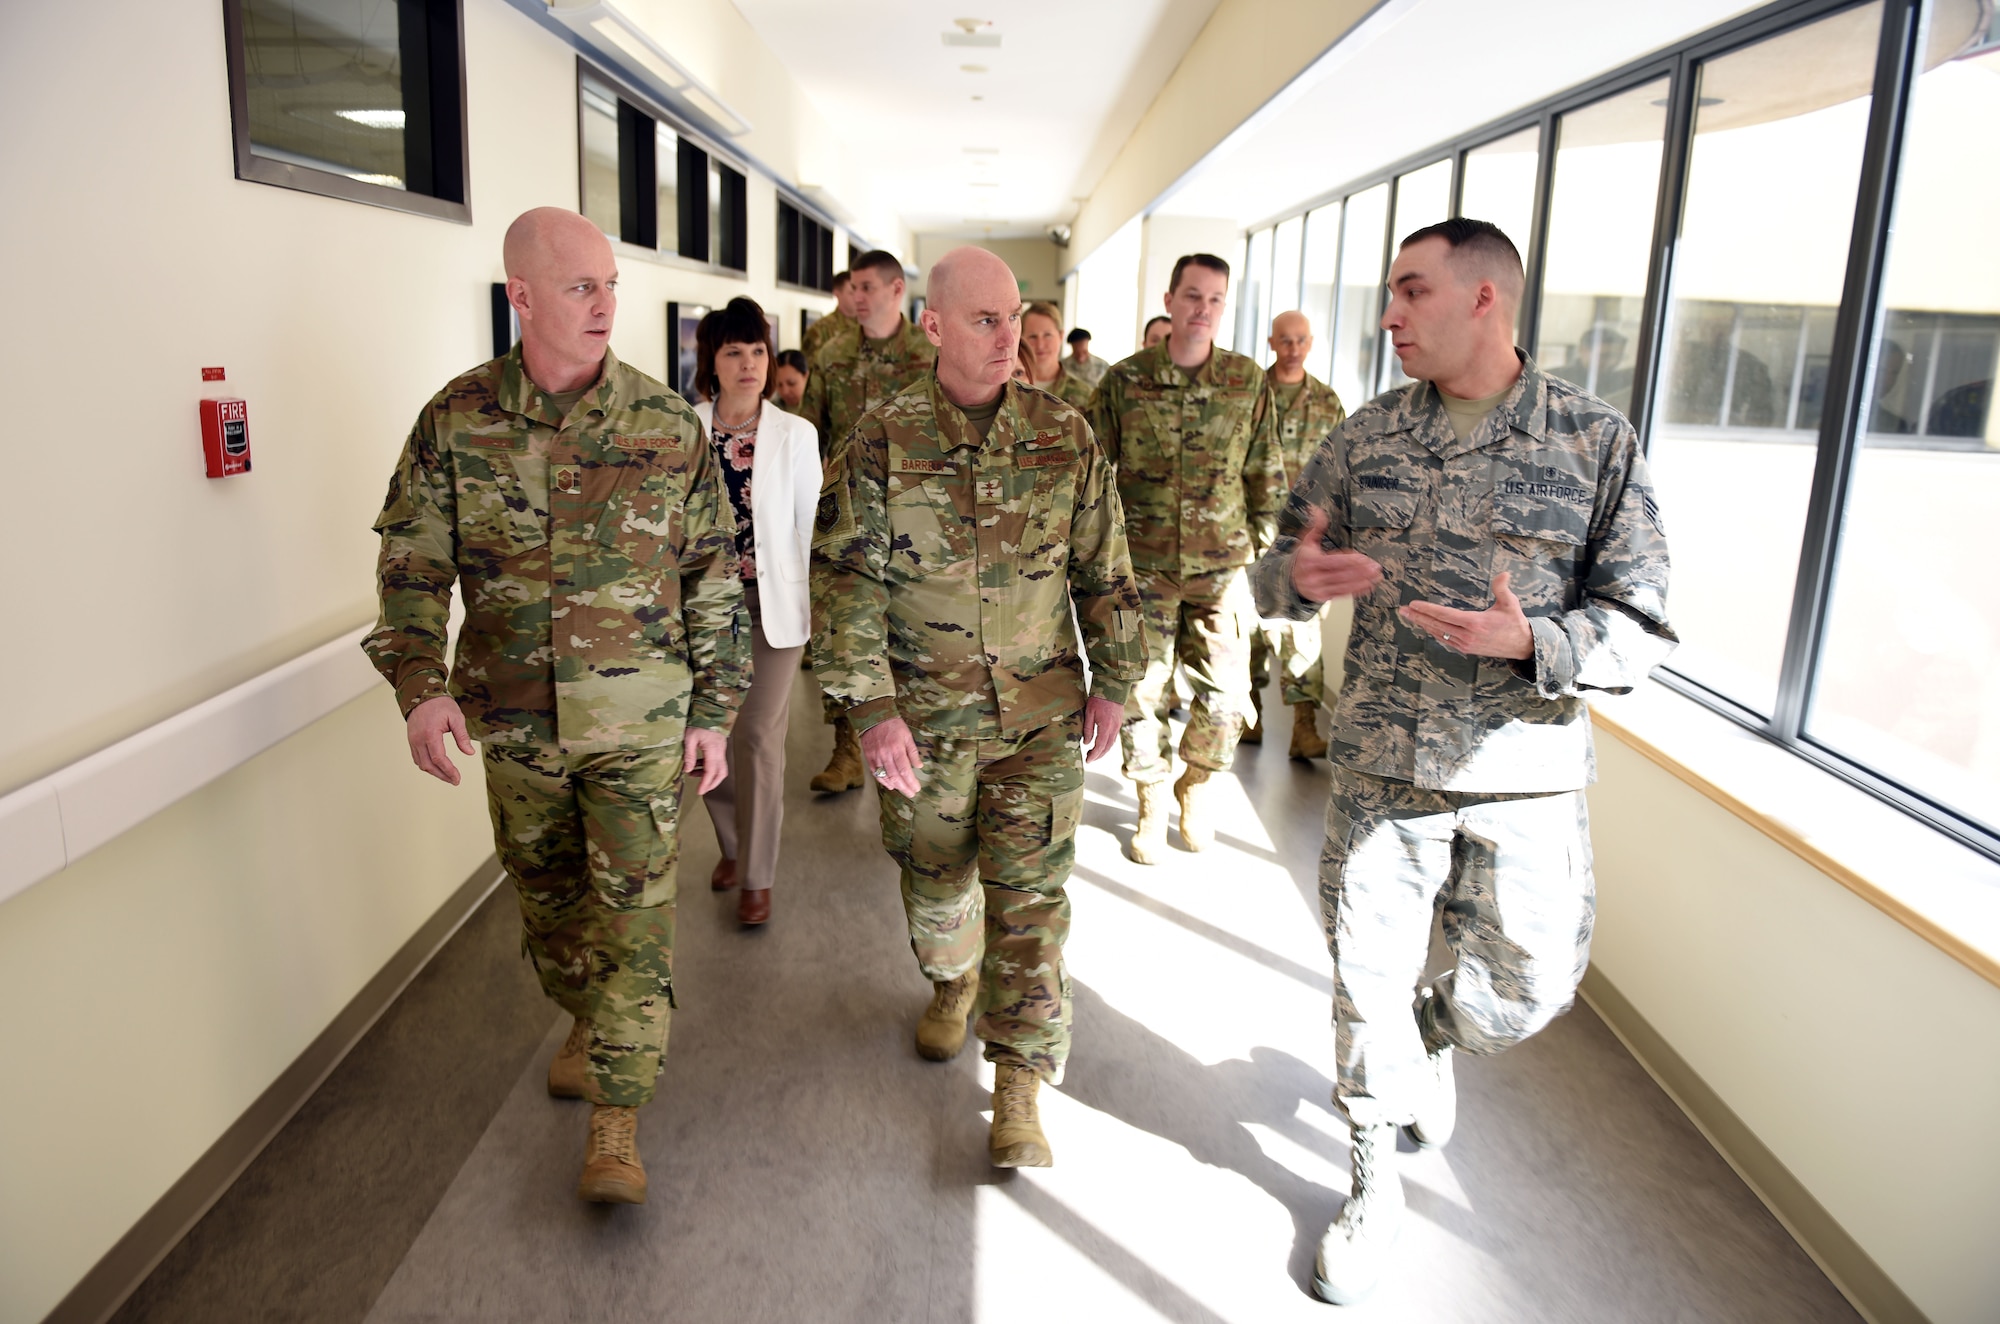 U.S. Air Force Maj. Gen. Sam Barrett, 18th Air Force commander, center, along with U.S. Air Force Chief Master Sgt. Chris Simpson, 18th Air Force command chief, left, tour David Grant USAF Medical Center at Travis Air Force Base, California, March 7, 2019. Barrett, along with his wife, Kelly, toured the base March 4 to 8 as part of a scheduled visit. (U.S. Air Force photo by Airman 1st Class Christian Conrad)